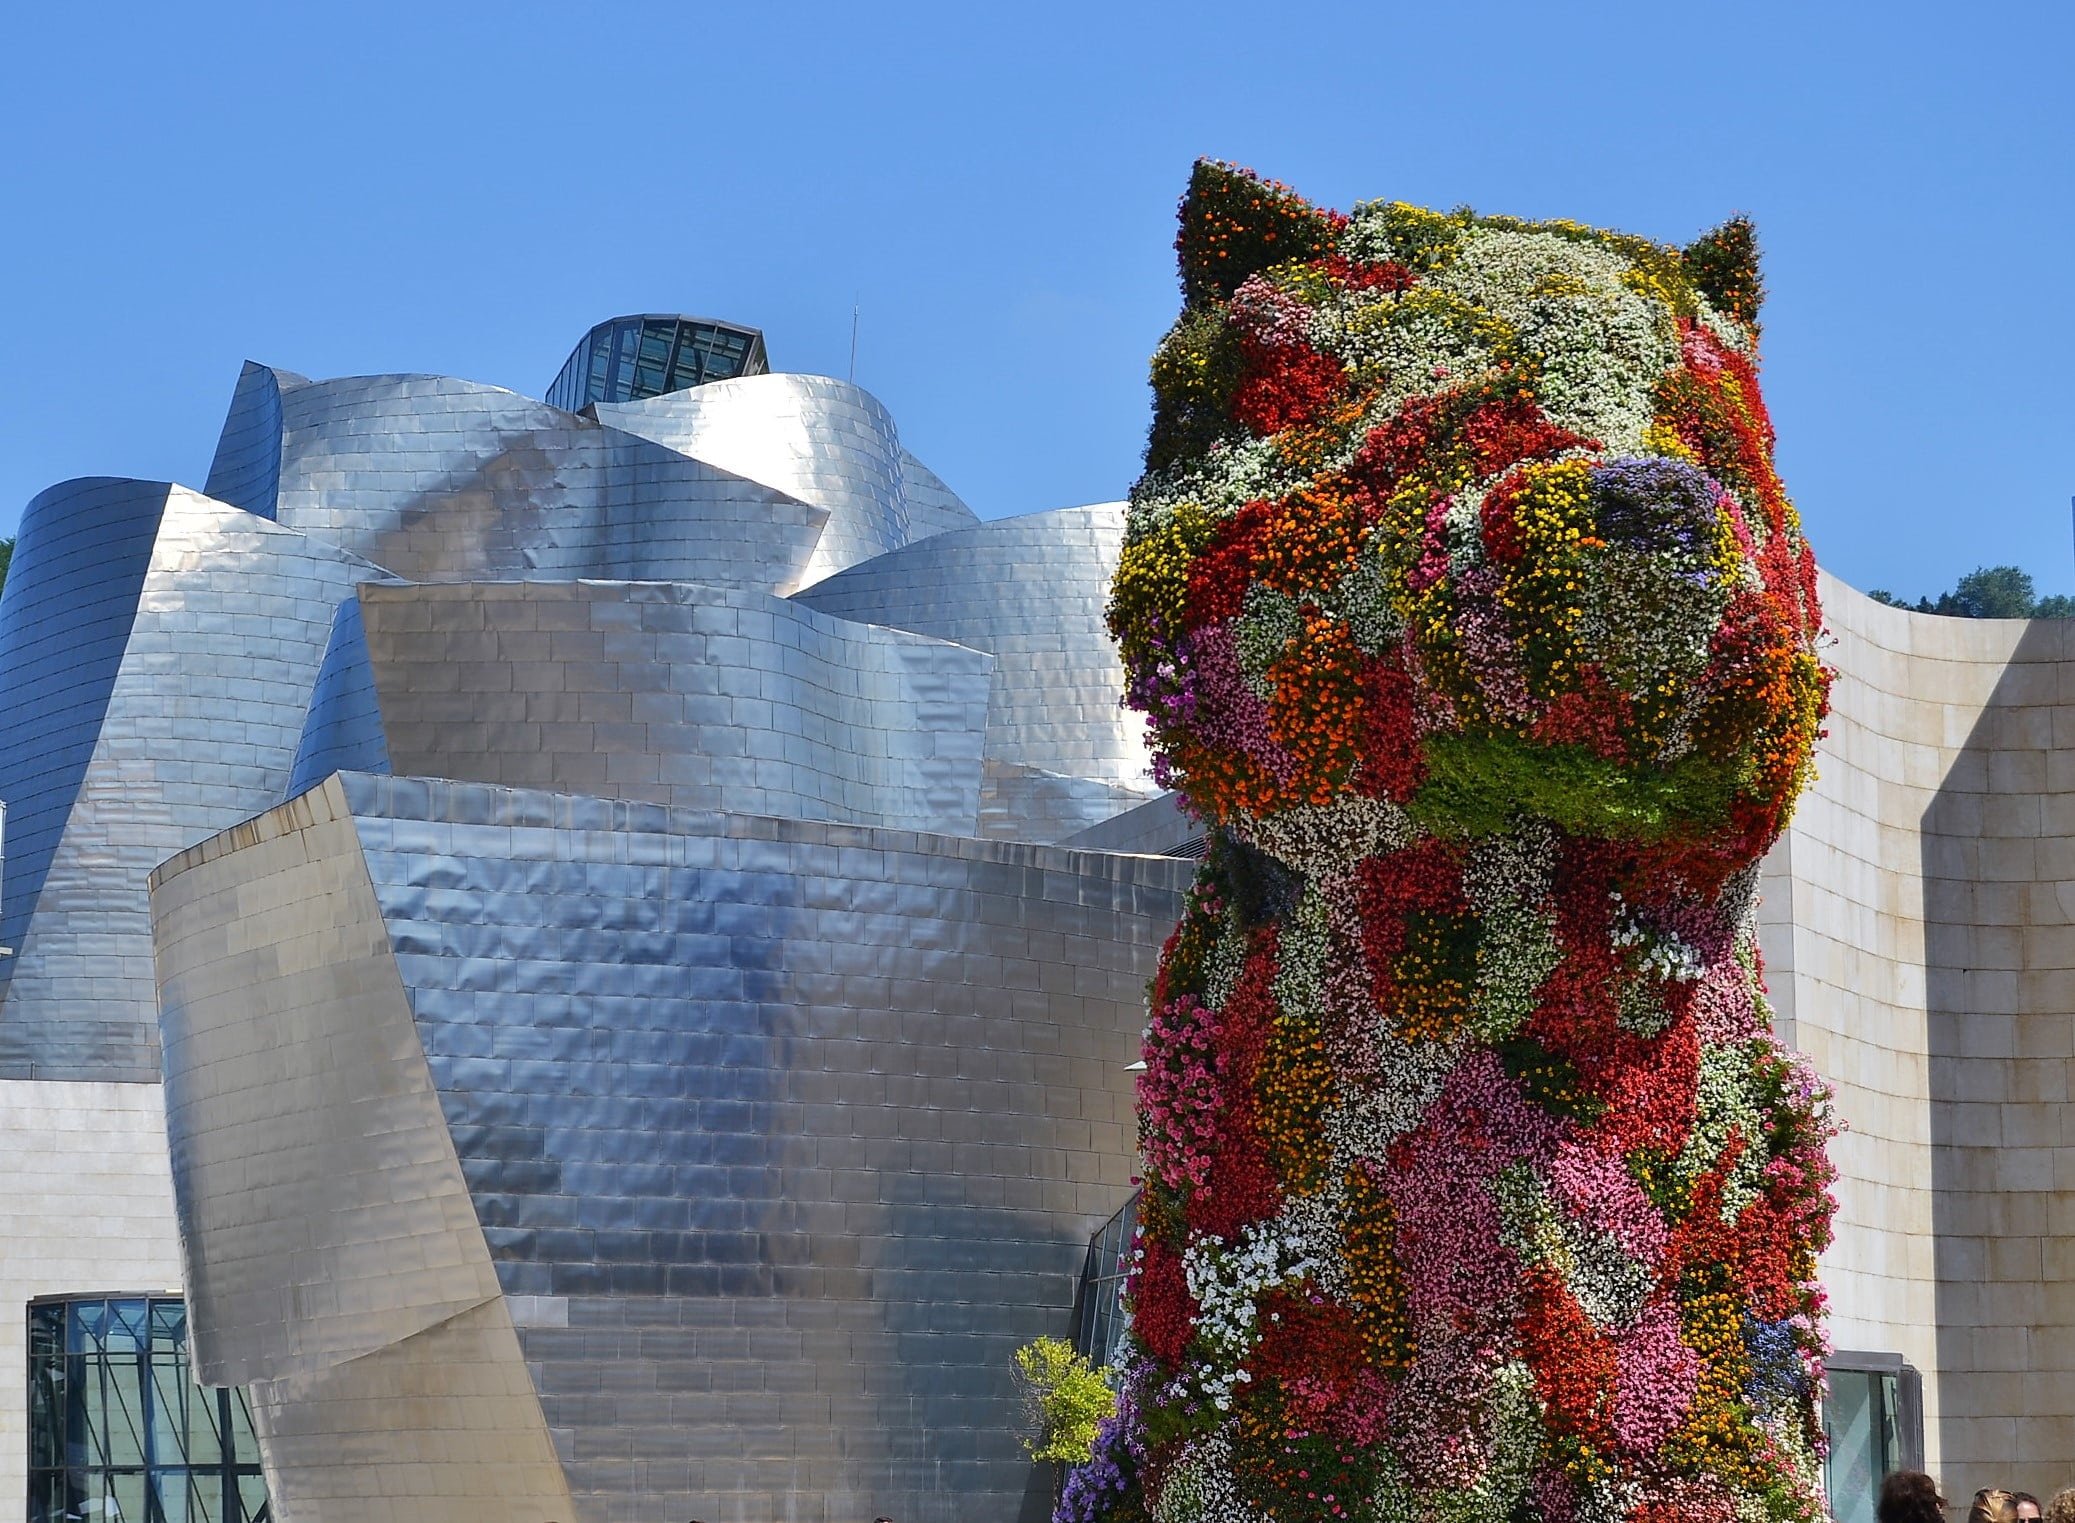 multicolored floral dog topiary at daytime, bilbao, pupi, guggemheim